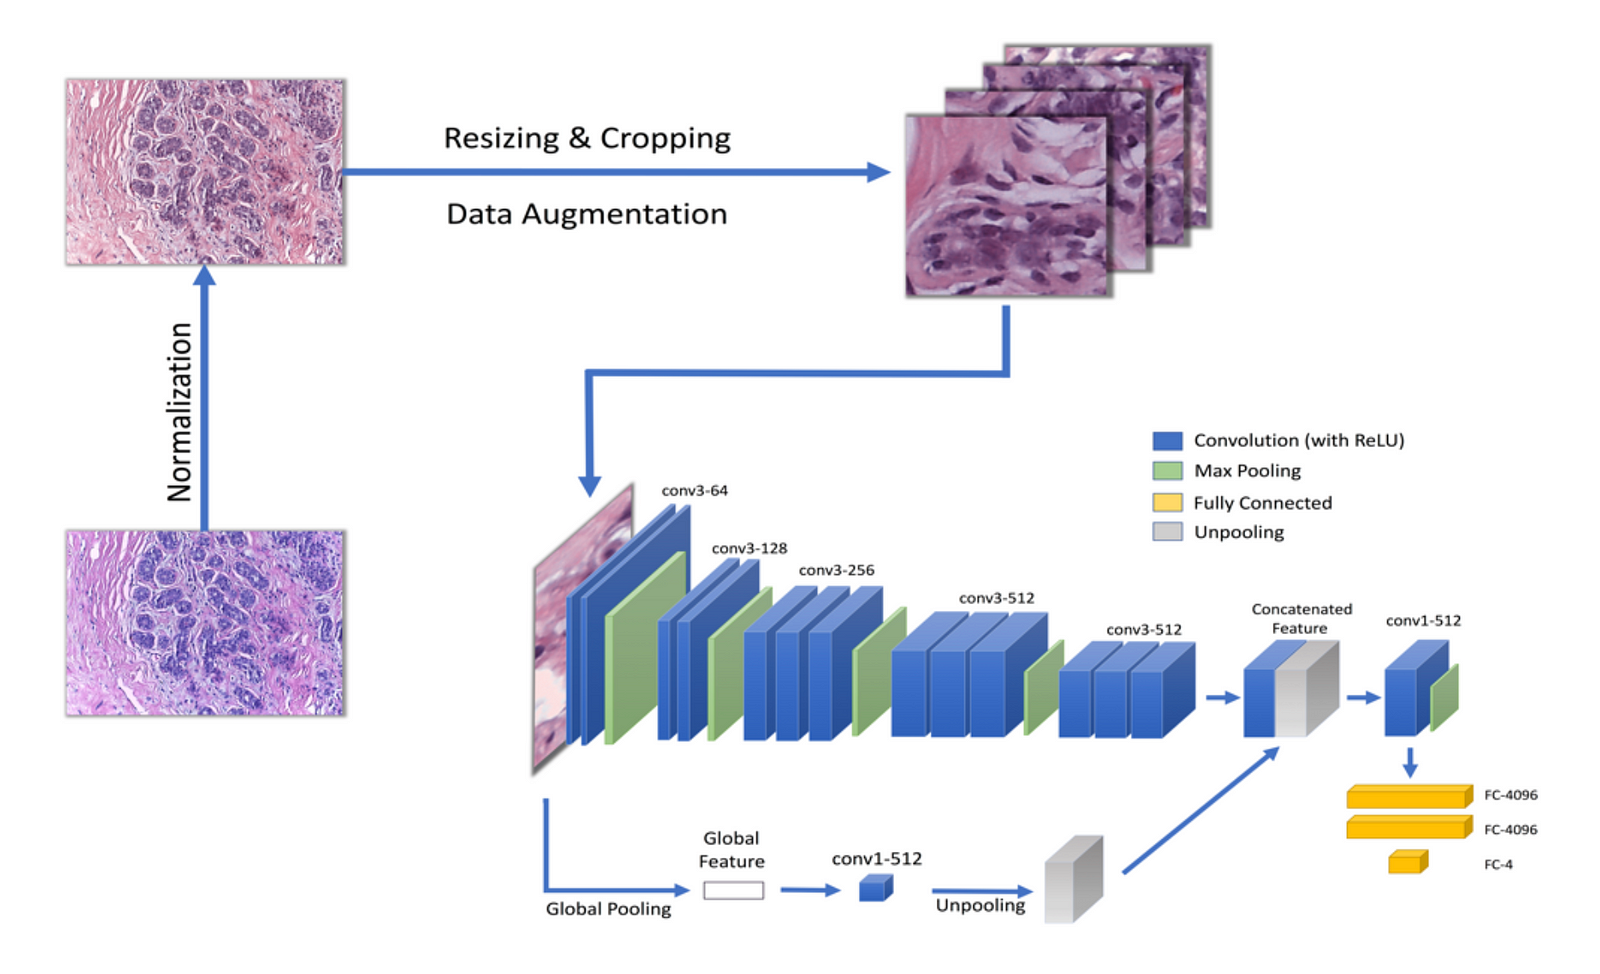 breast cancer classification using machine learning research paper